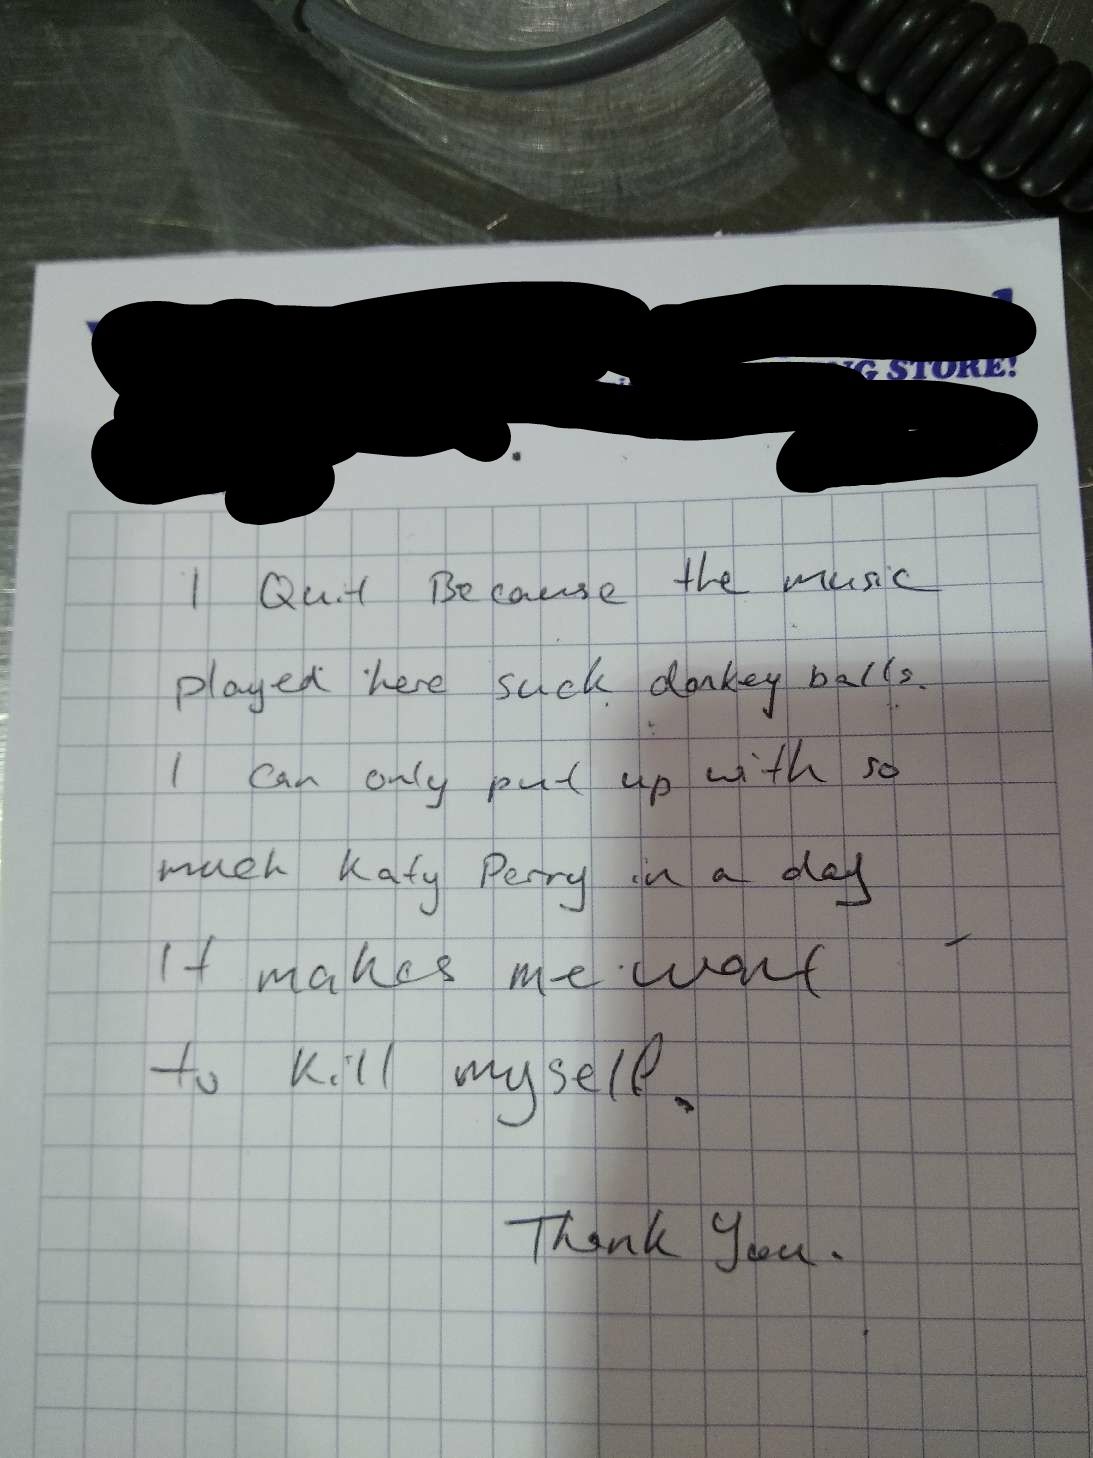 Found this resignation letter on my desk this morning